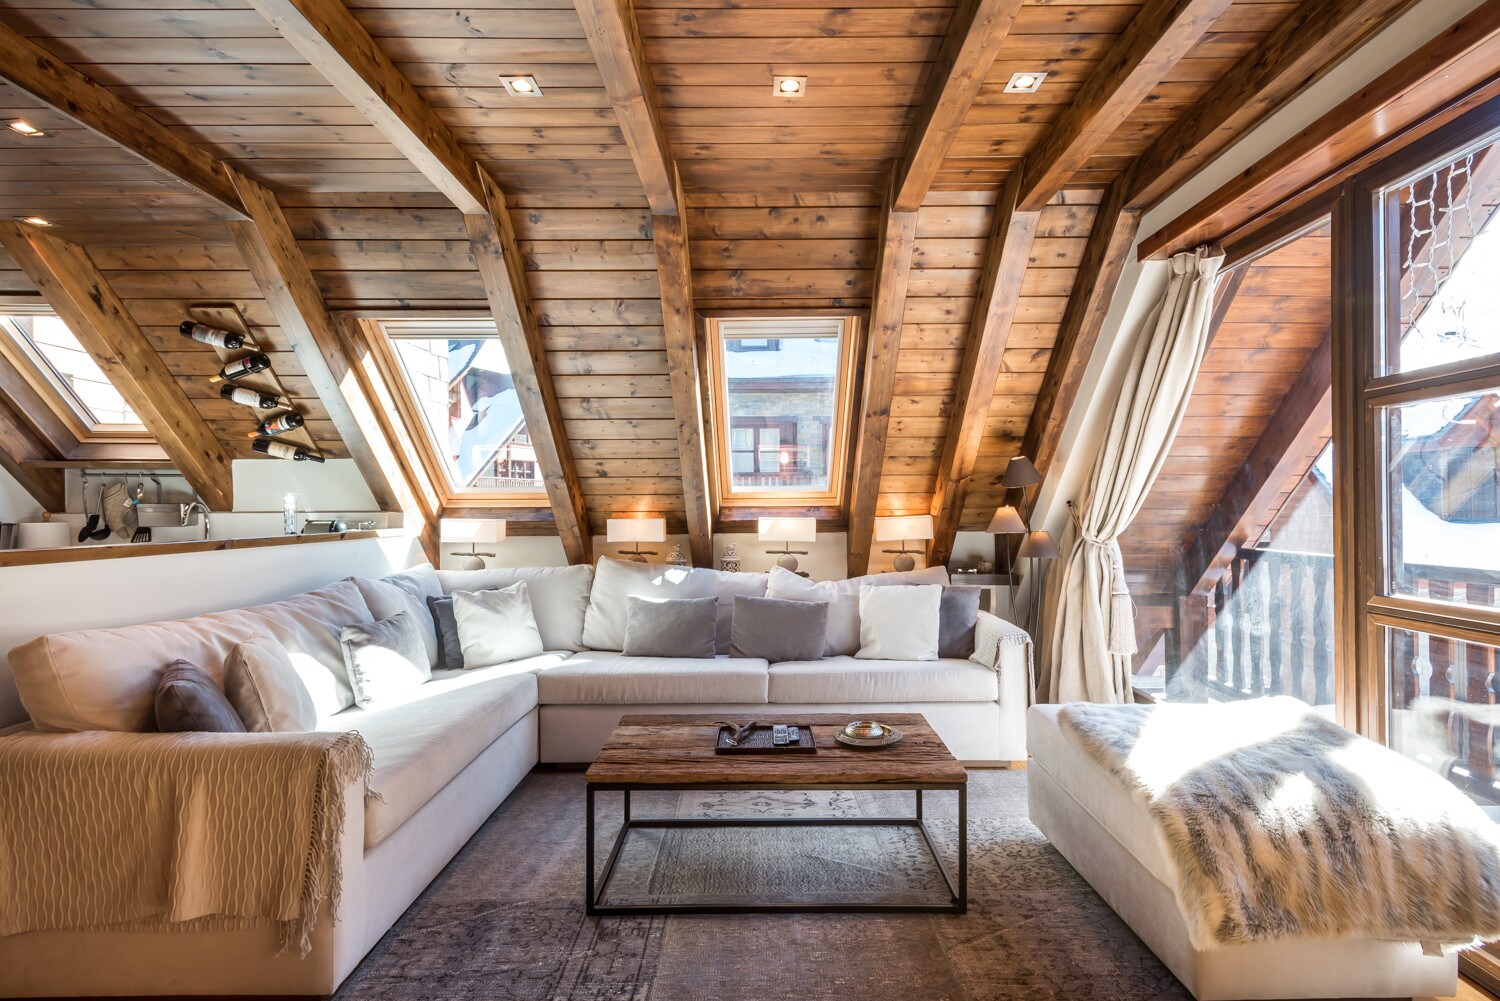 Marmotes by Totiaran is composed of a living room with kitchenette, 4 bedrooms and 3 bathrooms, in the urbanization of Val de Ruda, Baqueira,  at the foot of the slopes.